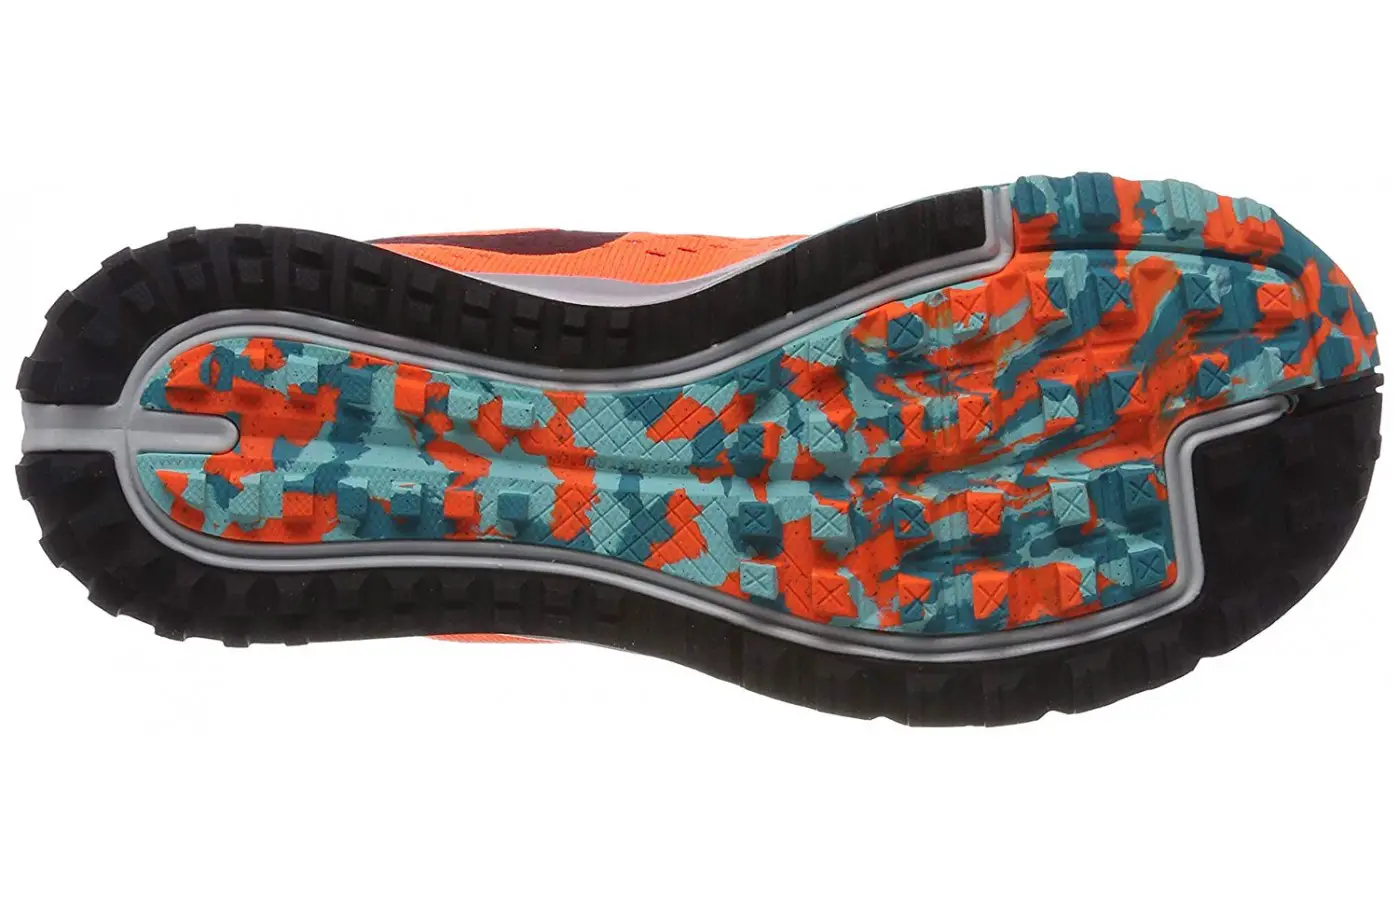 The strategic design of the waffle-patterned outsole provides added durability and multi-surface traction.